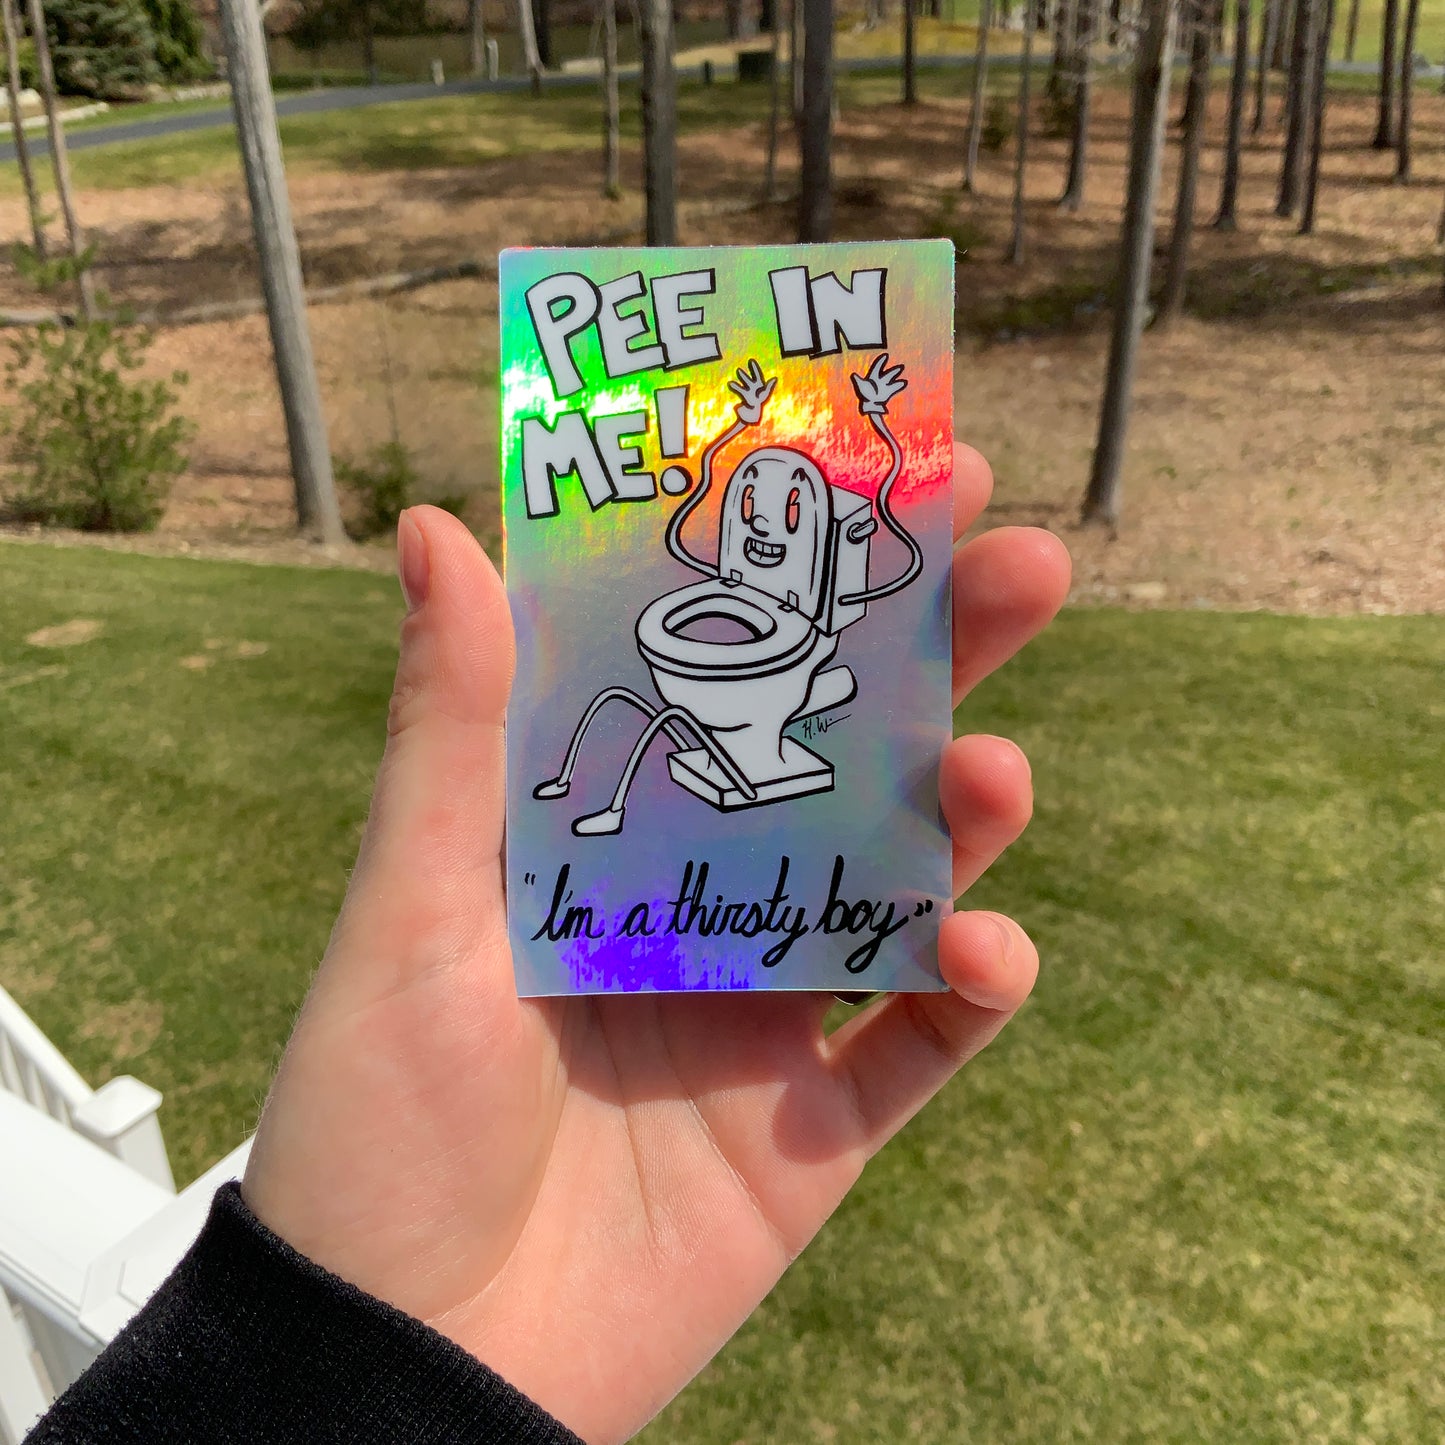 Holographic Toilet Guy Sticker